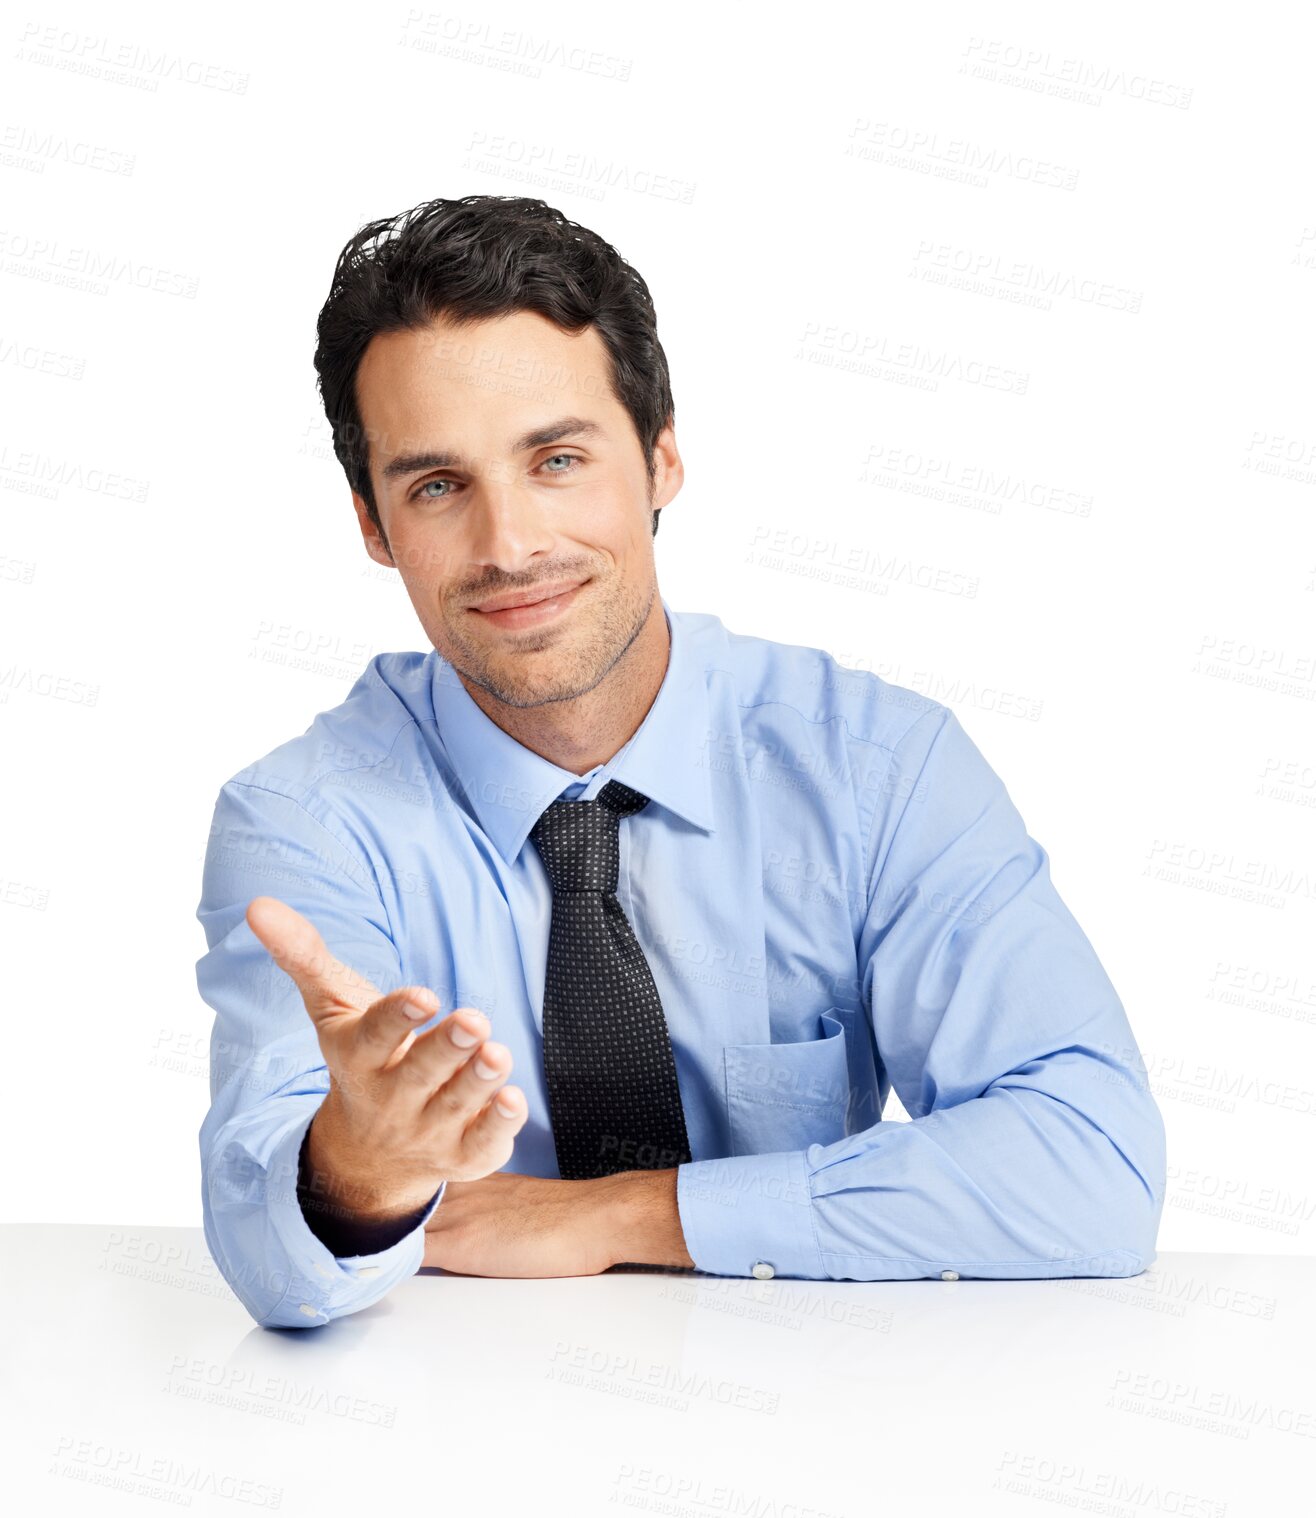 Buy stock photo Happy businessman, portrait and handshake for meeting sitting isolated on a transparent PNG background. Man, employer or recruiter shaking hands for interview, hiring or introduction in b2b or deal